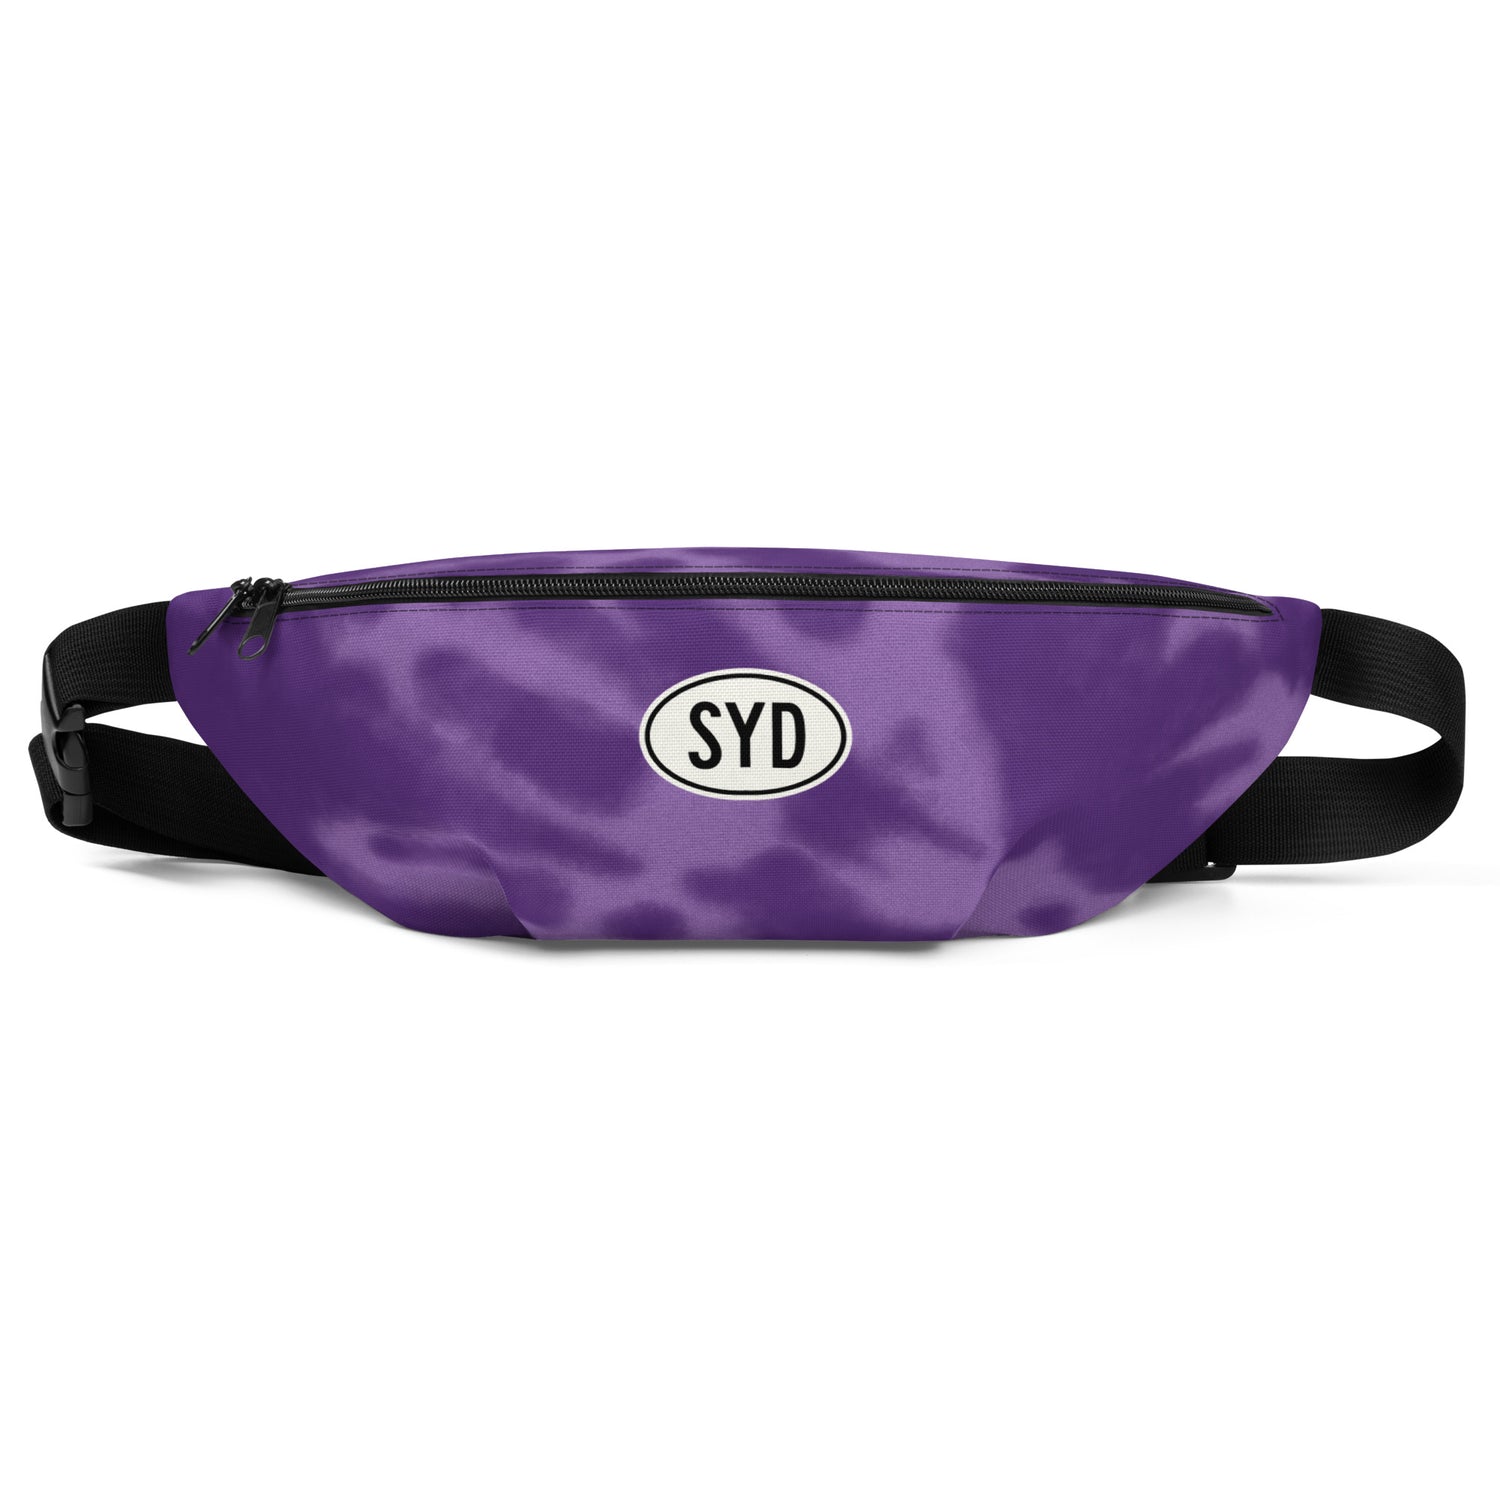 Sydney Australia Backpacks, Fanny Packs and Tote Bags • SYD Airport Code